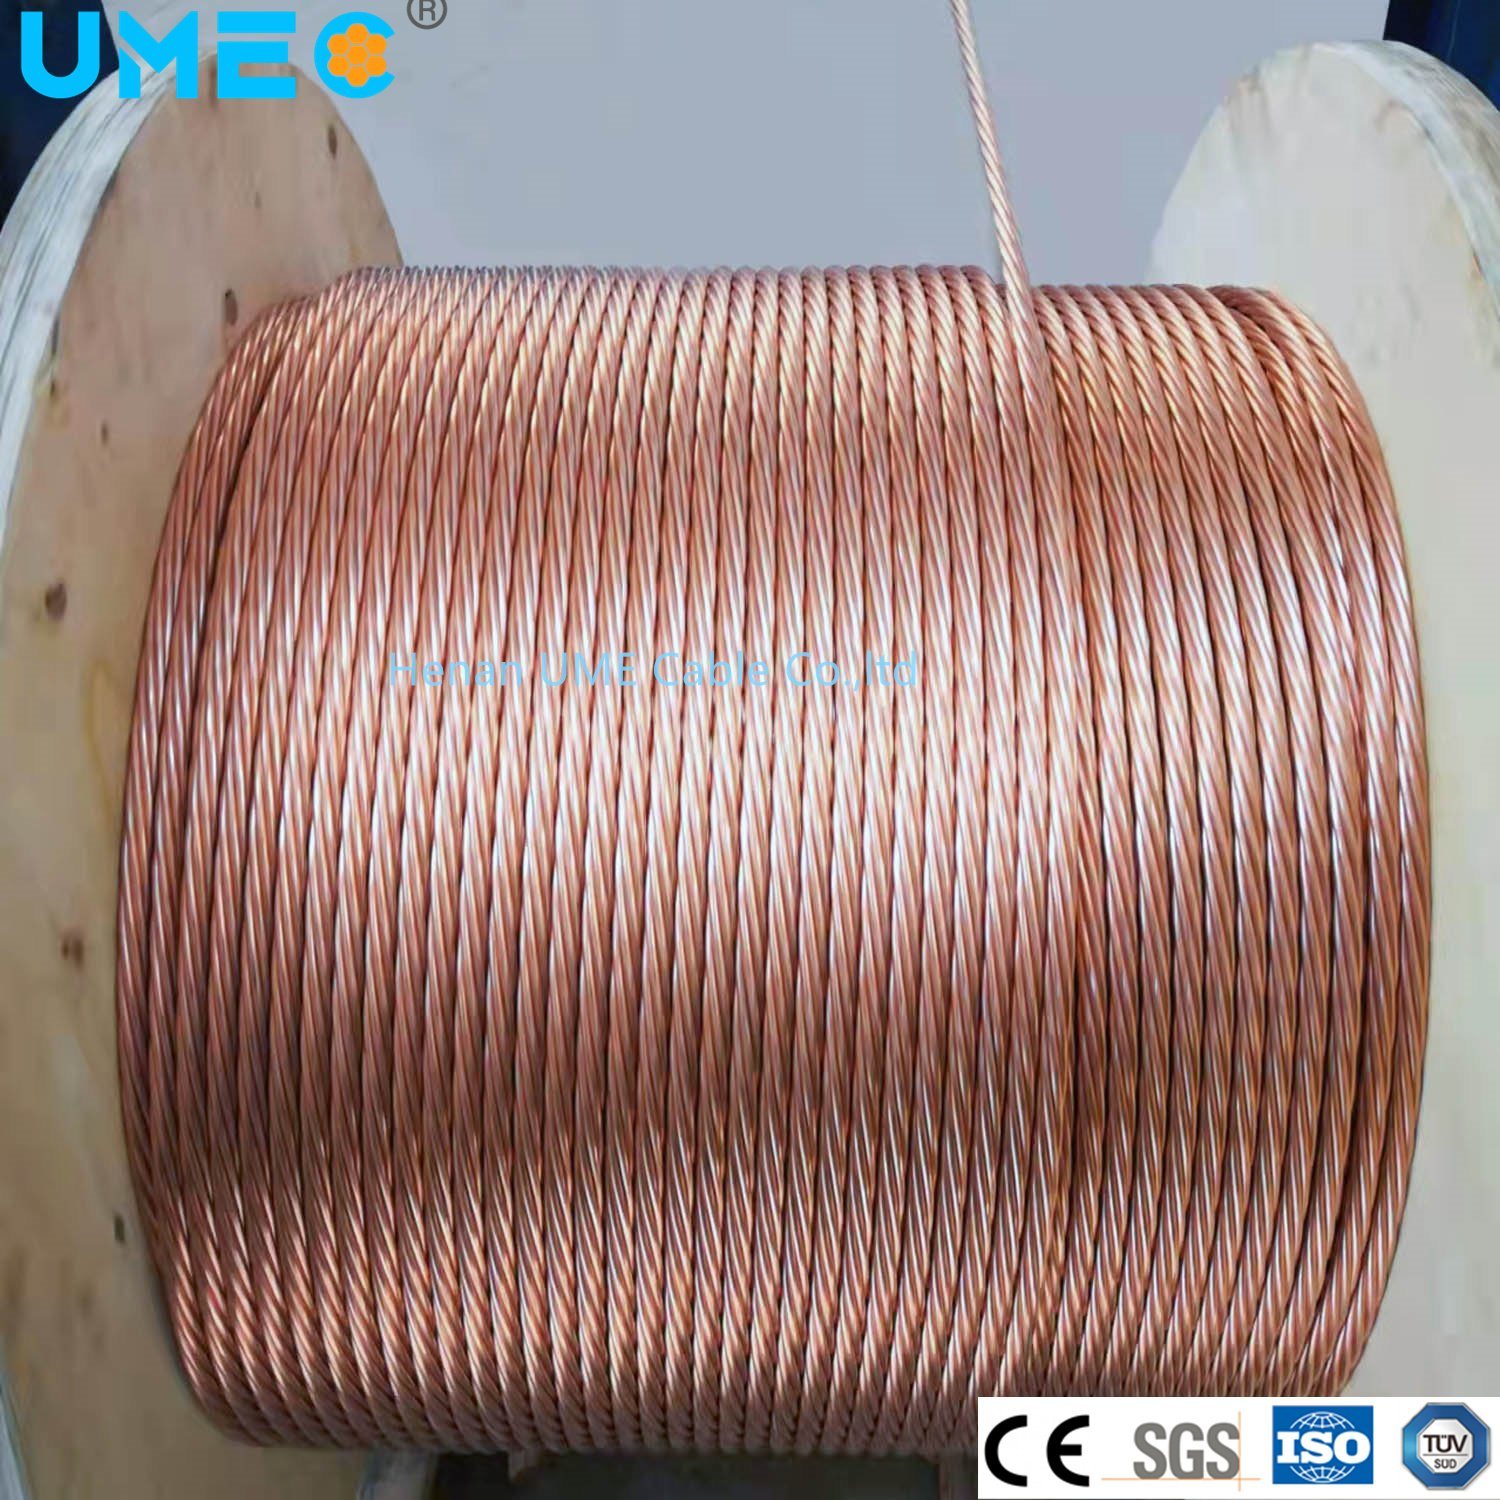 Conductivity 15% China Original Copper Clad Steel Wire for Power Transmission CCS Wire